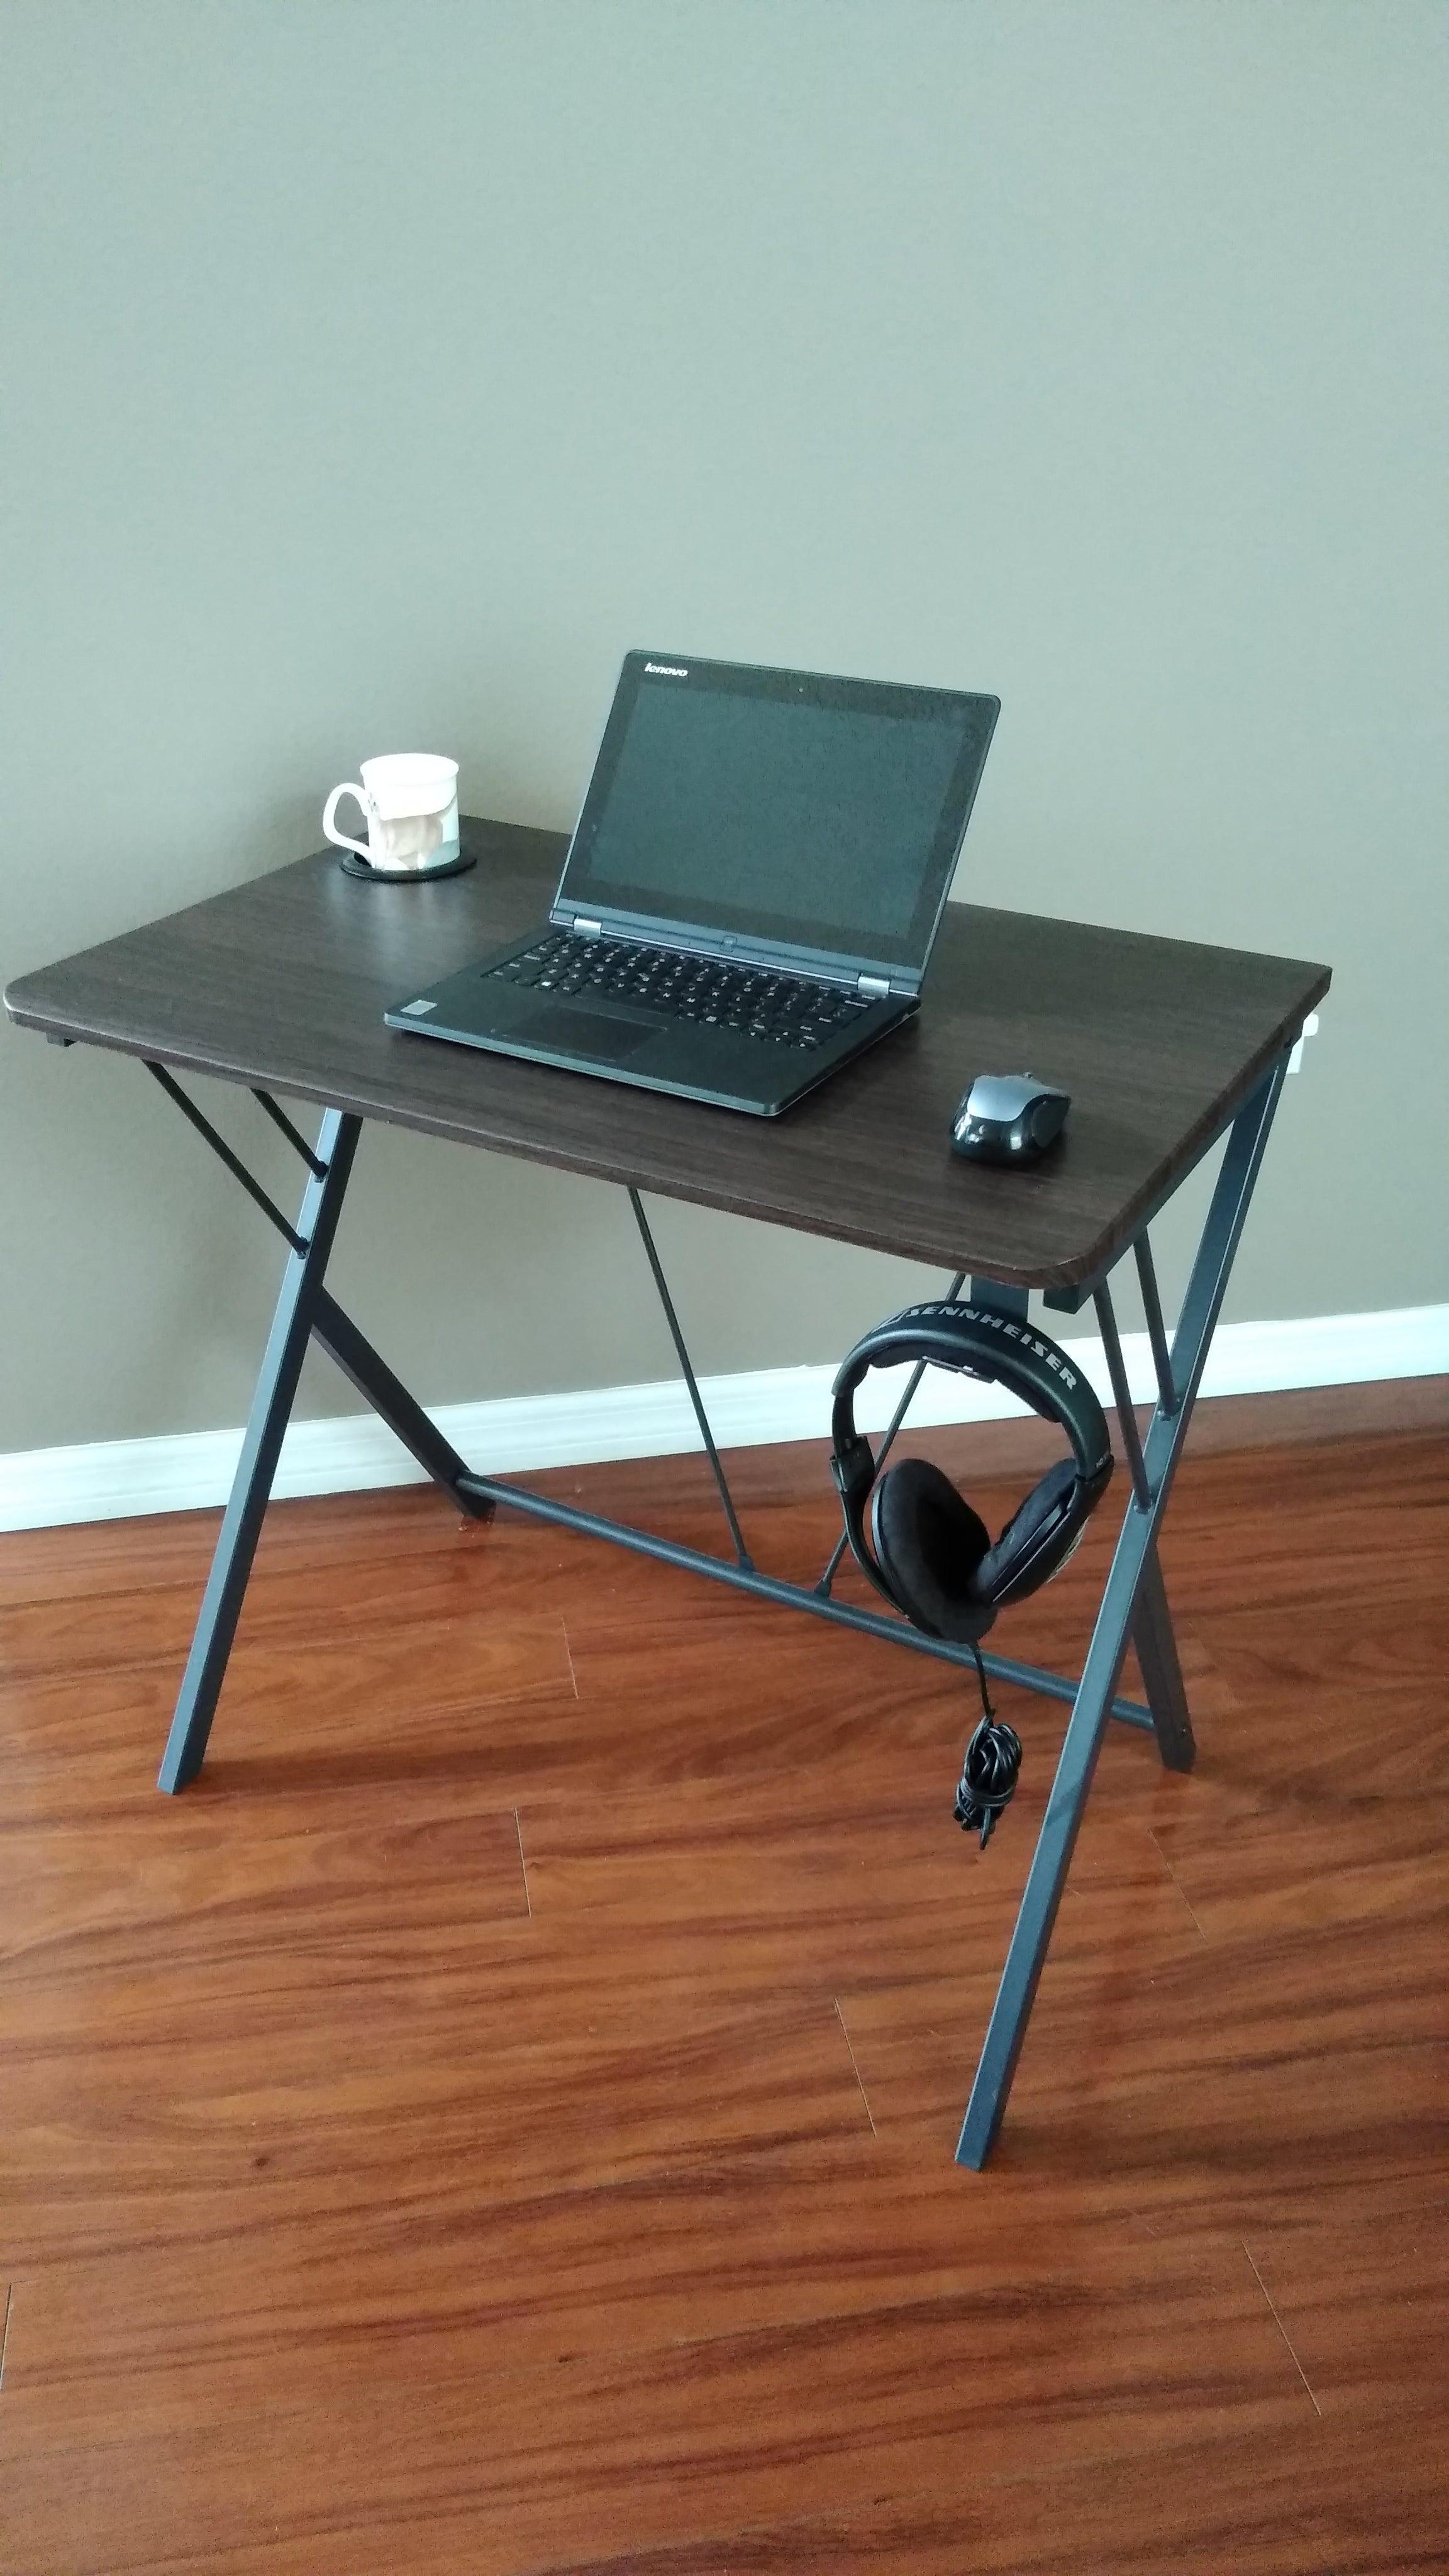 32" Gaming Writing compact computer desk with cup holder and back[-pack or headphones hook.